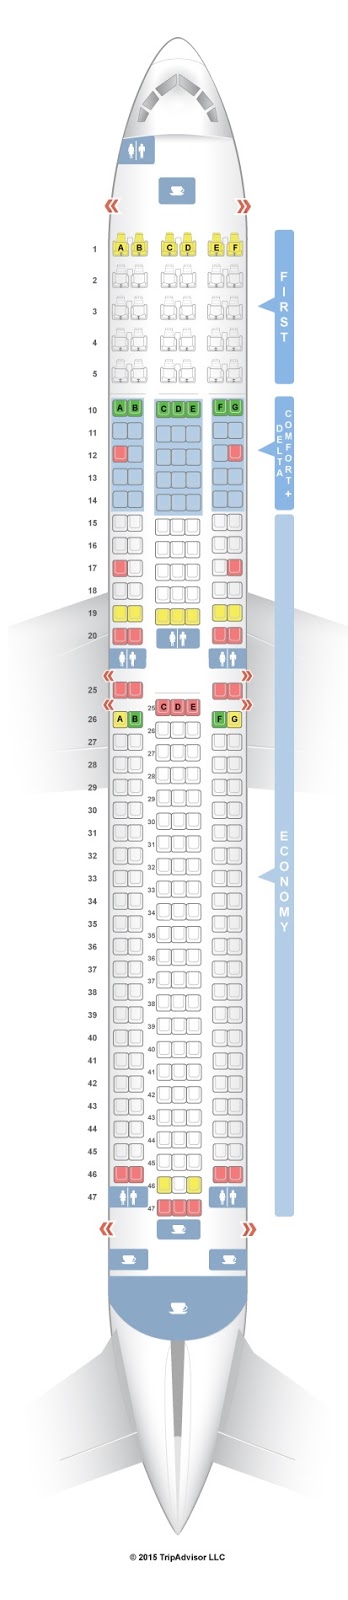 Delta Boeing 737 Seating Chart